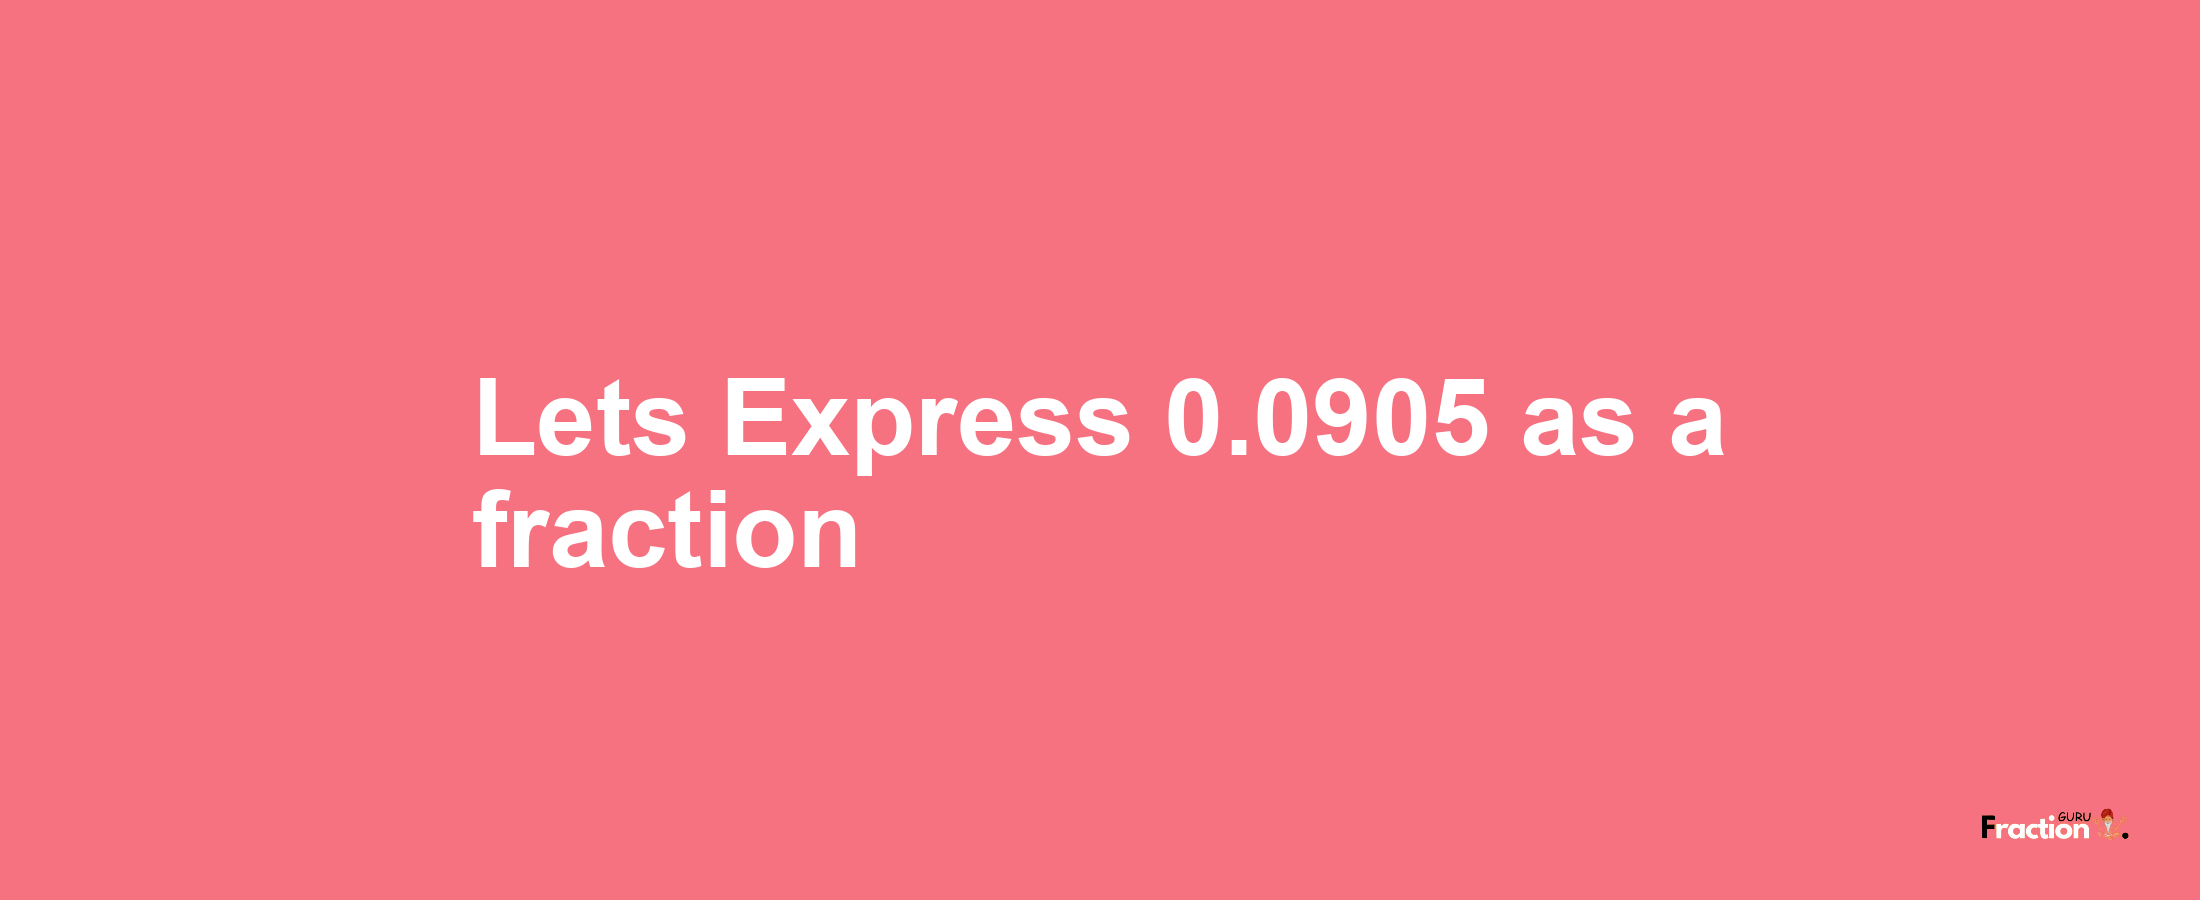 Lets Express 0.0905 as afraction